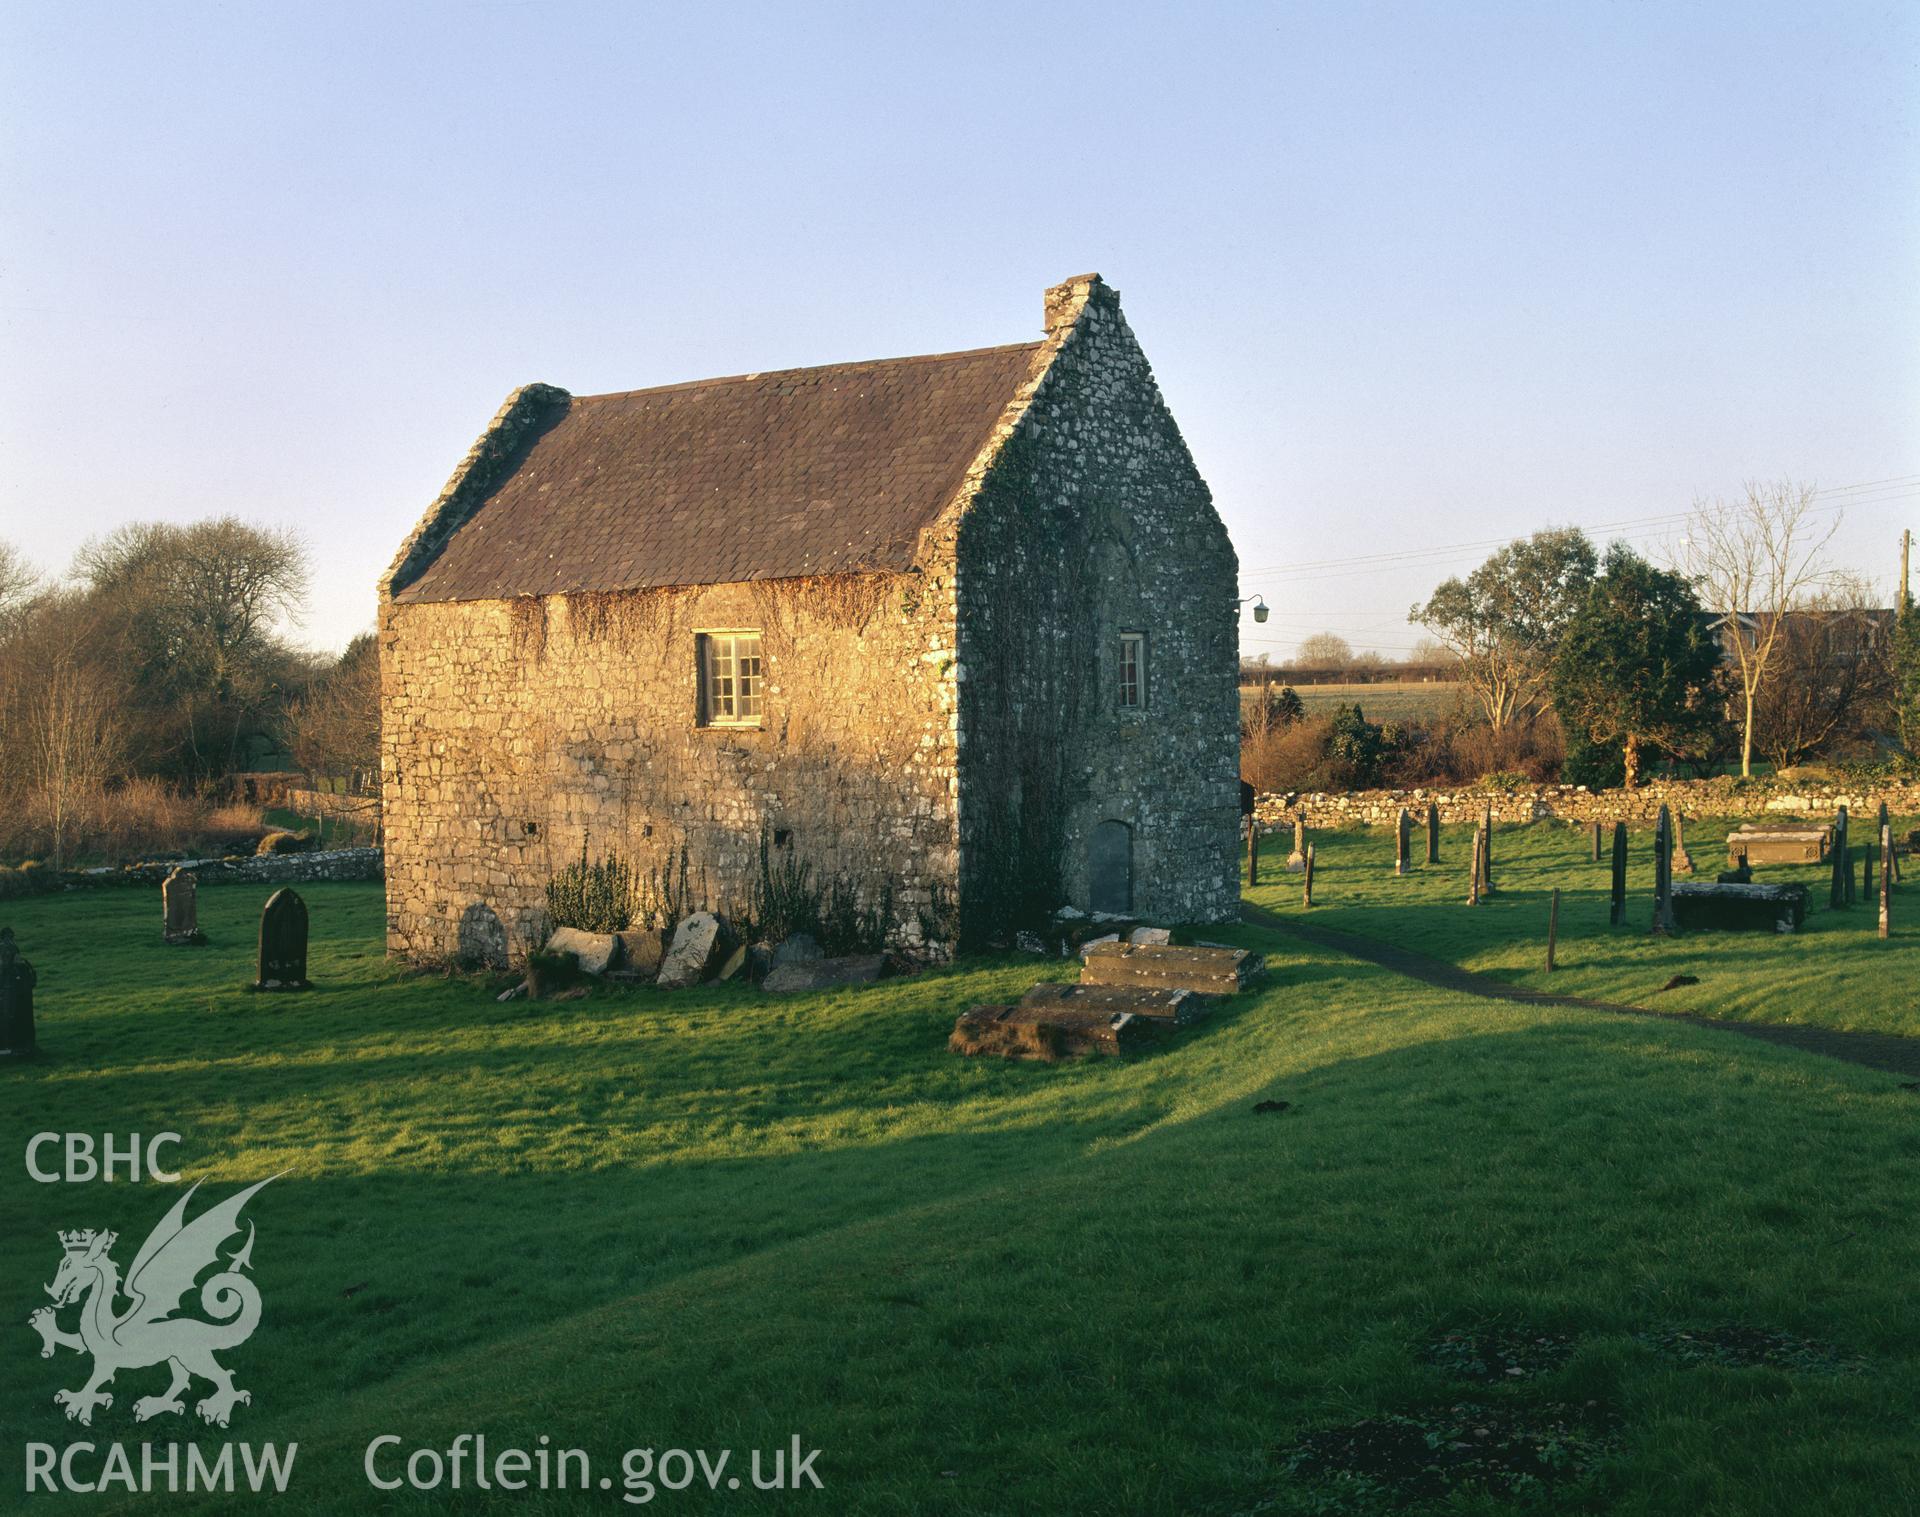 RCAHMW colour transparency showing view of the Charnel House at Carew Church, taken by I.N. Wright, 2003.